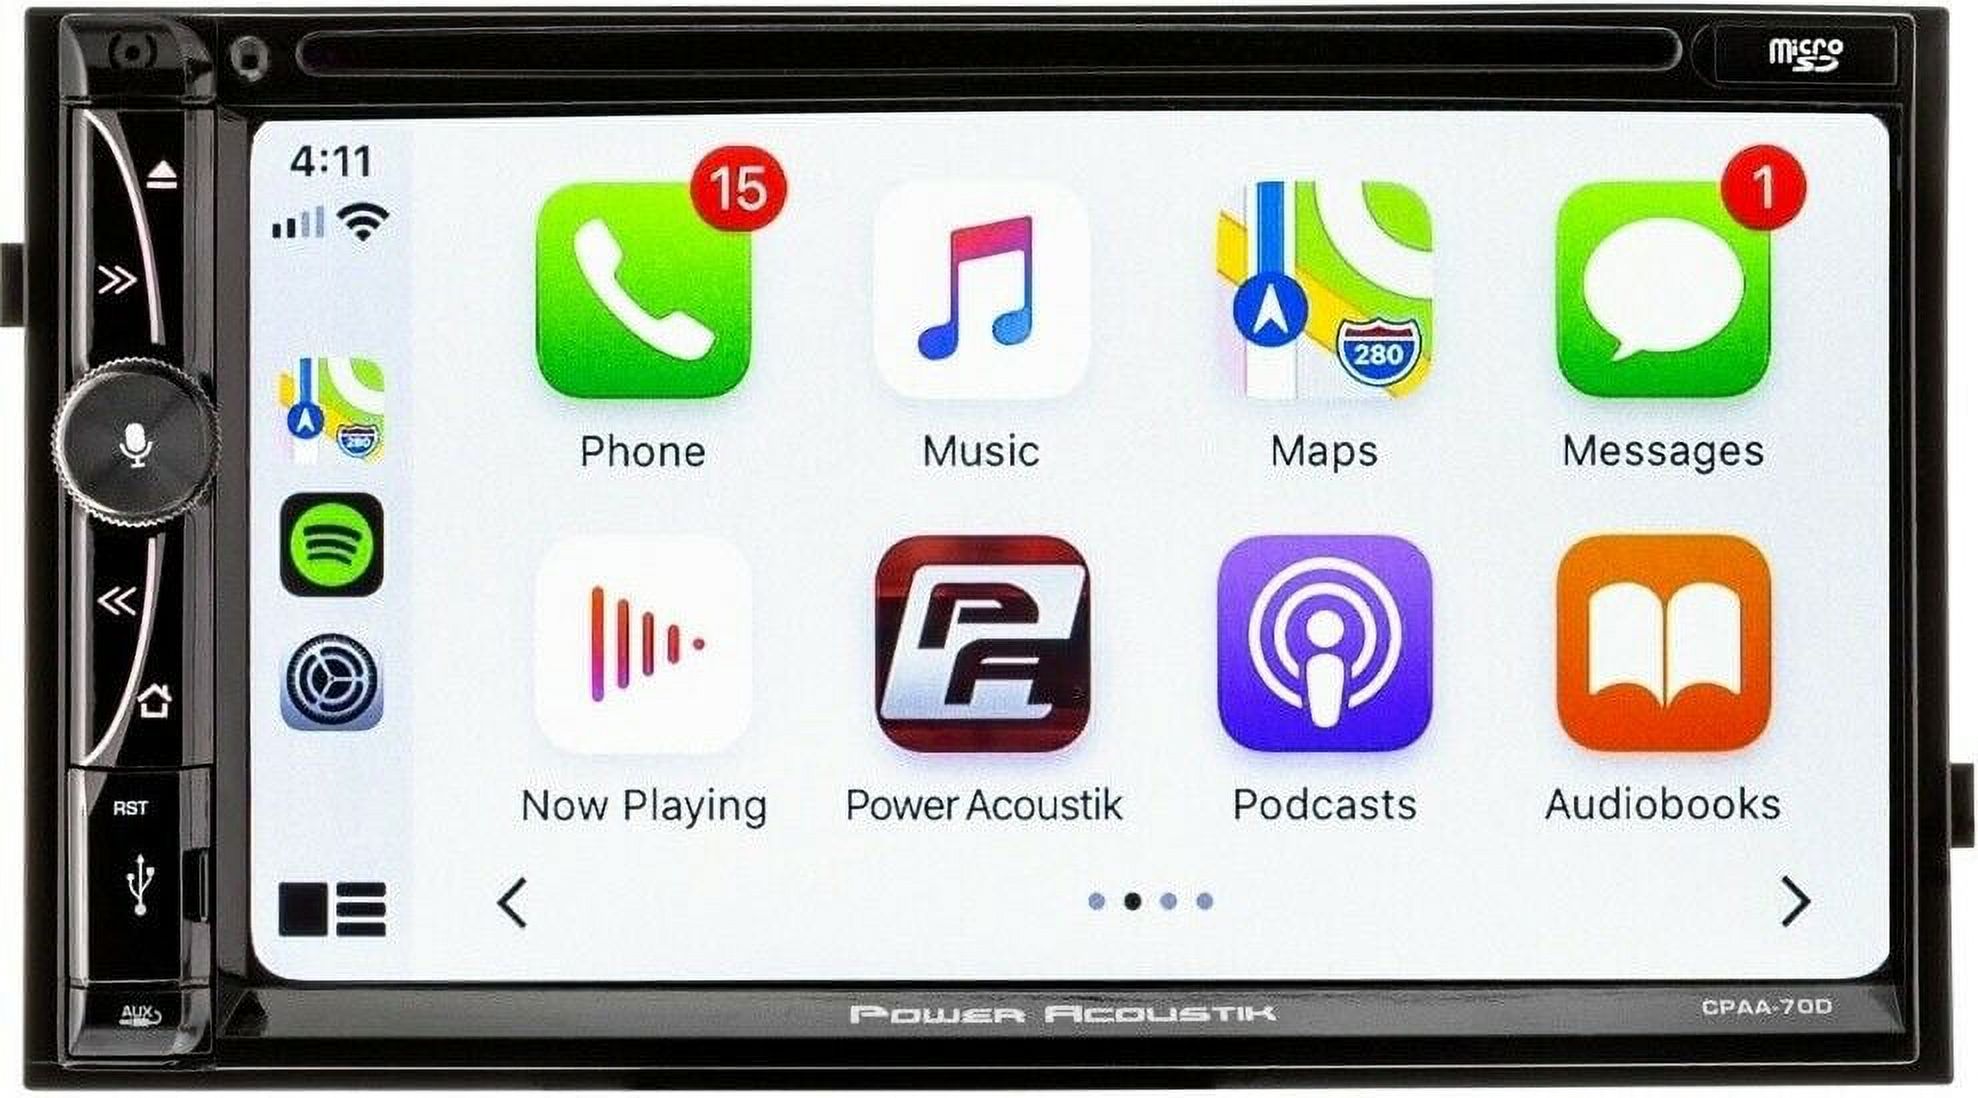 GMC SIERRA SAVANA GPS APPLE CARPLAY NAVIGATION (works with IPHONE) AM/FM USB/BLUETOOTH CAR RADIO STEREO PKG. INCL. VEHICLE HARDWARE: DASH KIT, WIRE HARNESS, AND ANTENNA ADAPTER WHEN REQIRED. - image 3 of 7